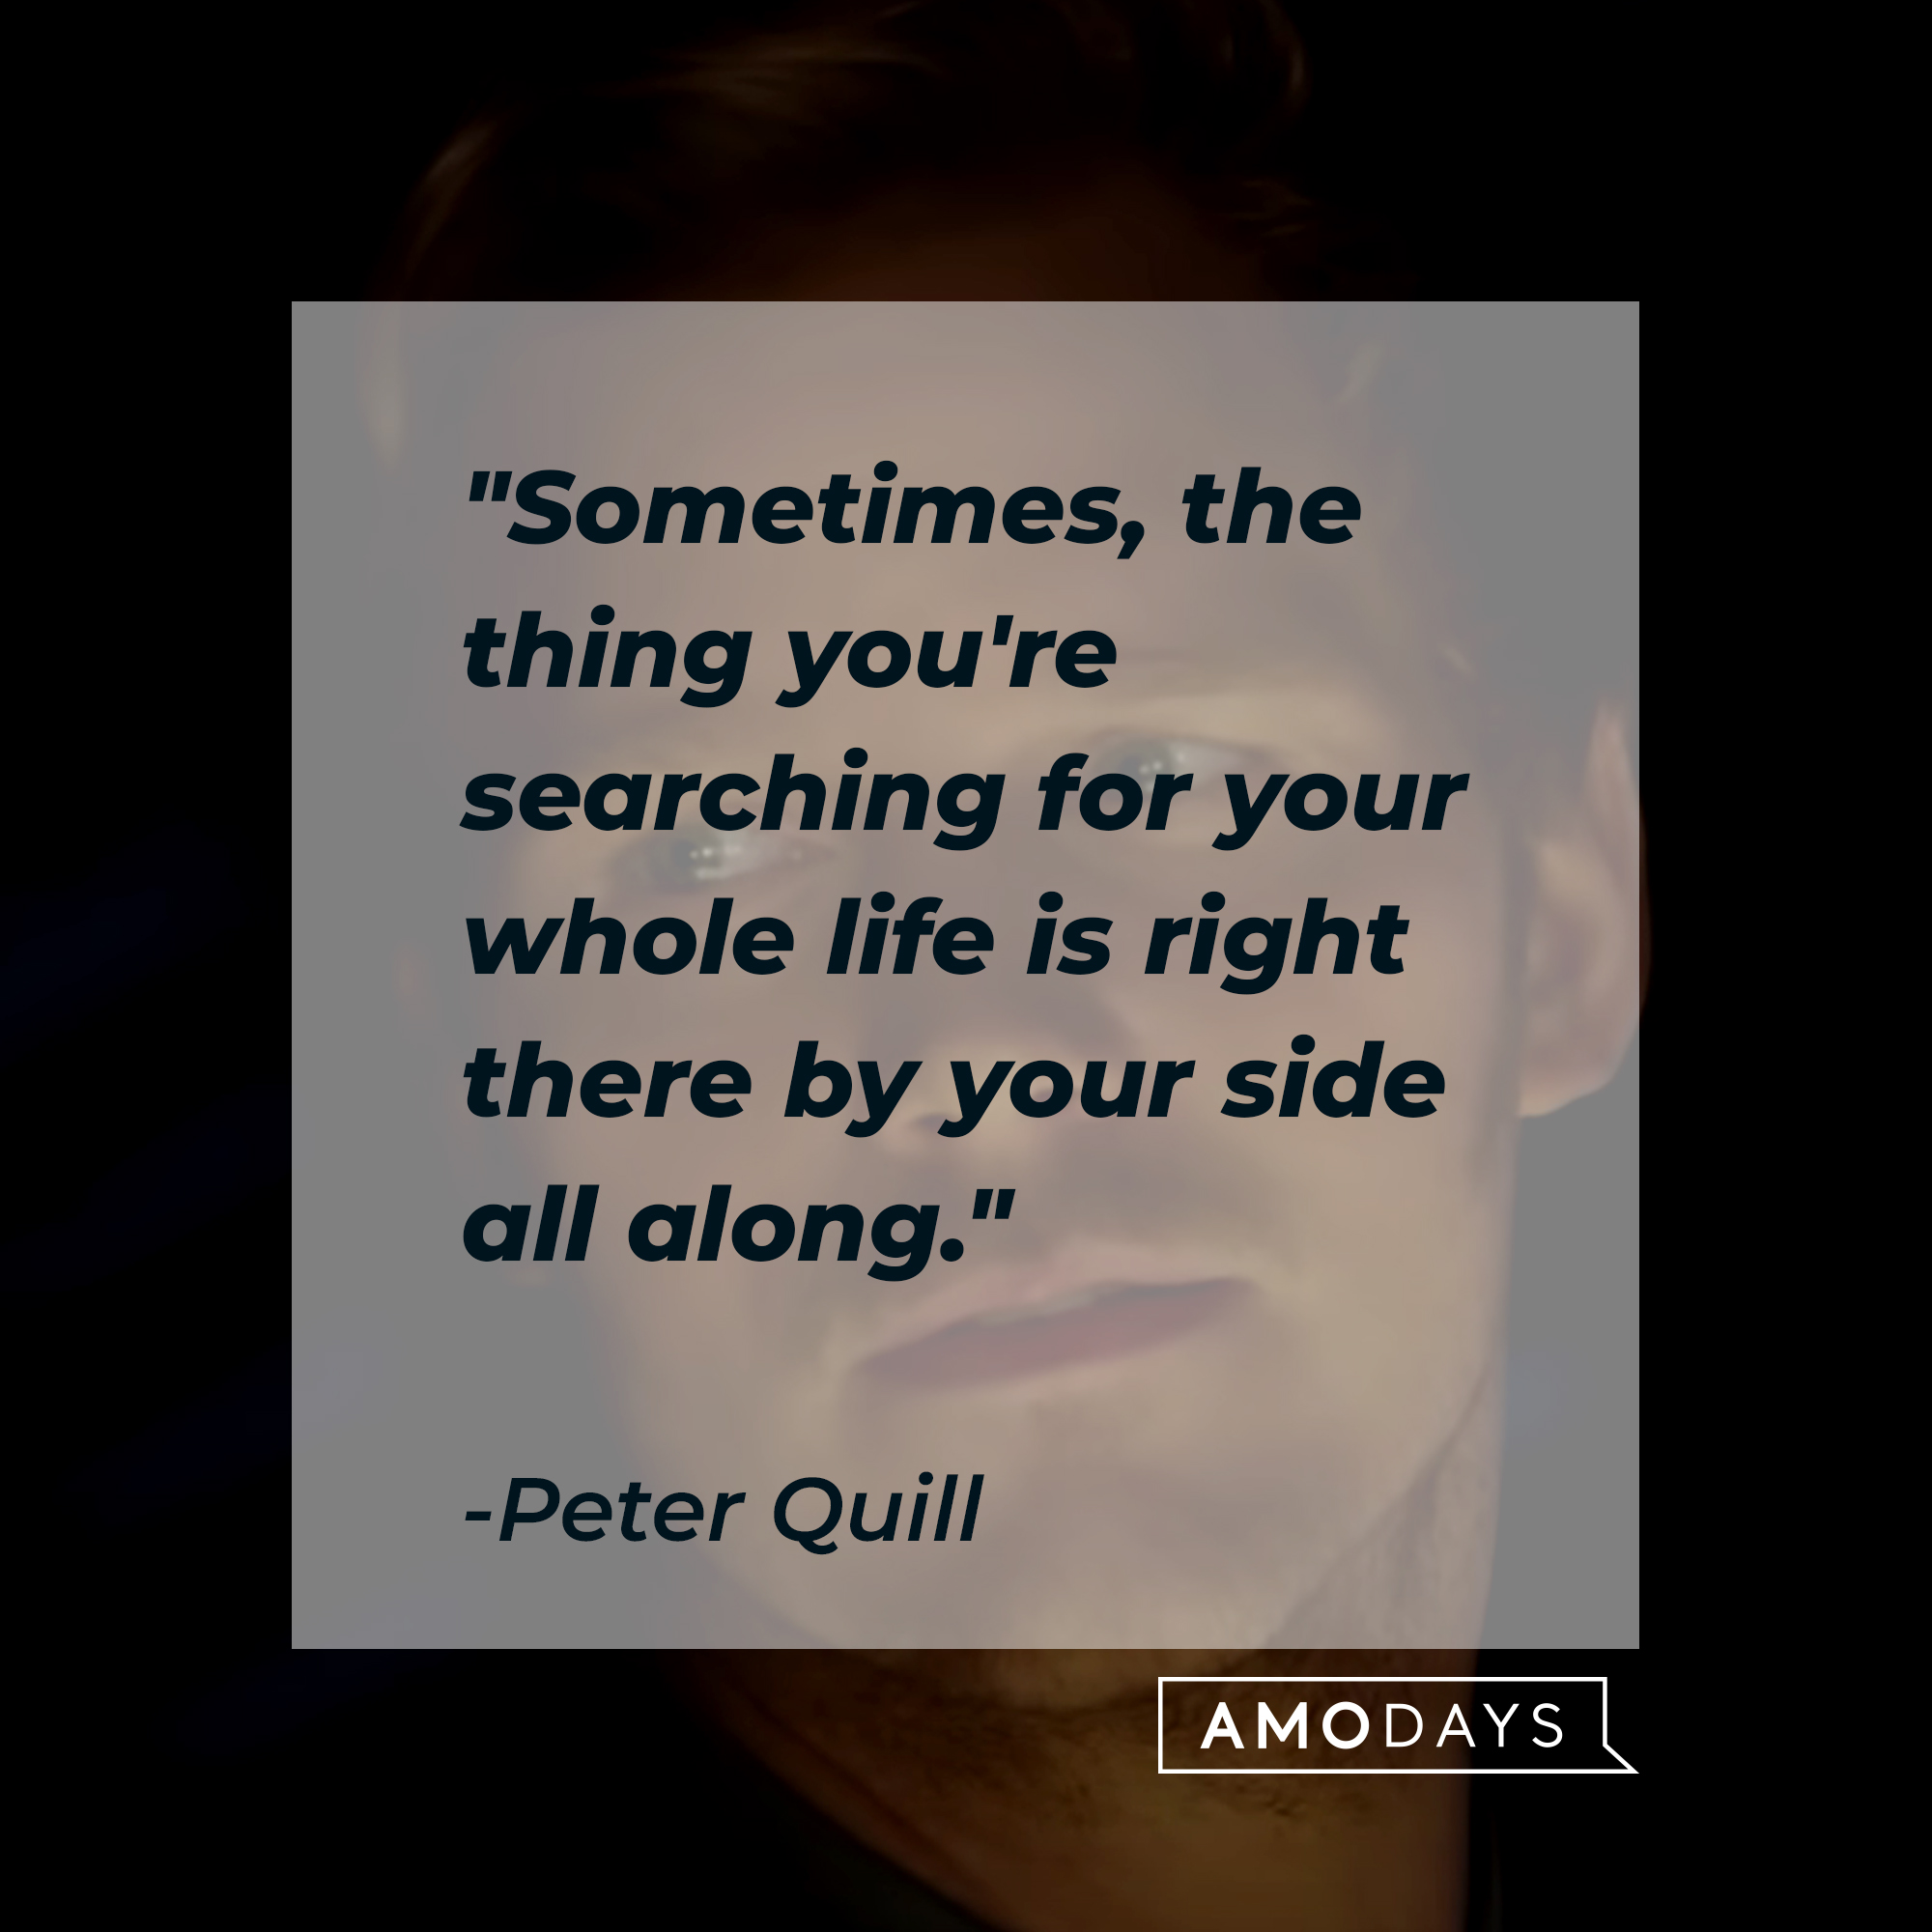 Peter Quill's quote, "Sometimes, the thing you're searching for your whole life is right there by your side all along." | Image: youtube.com/marvel